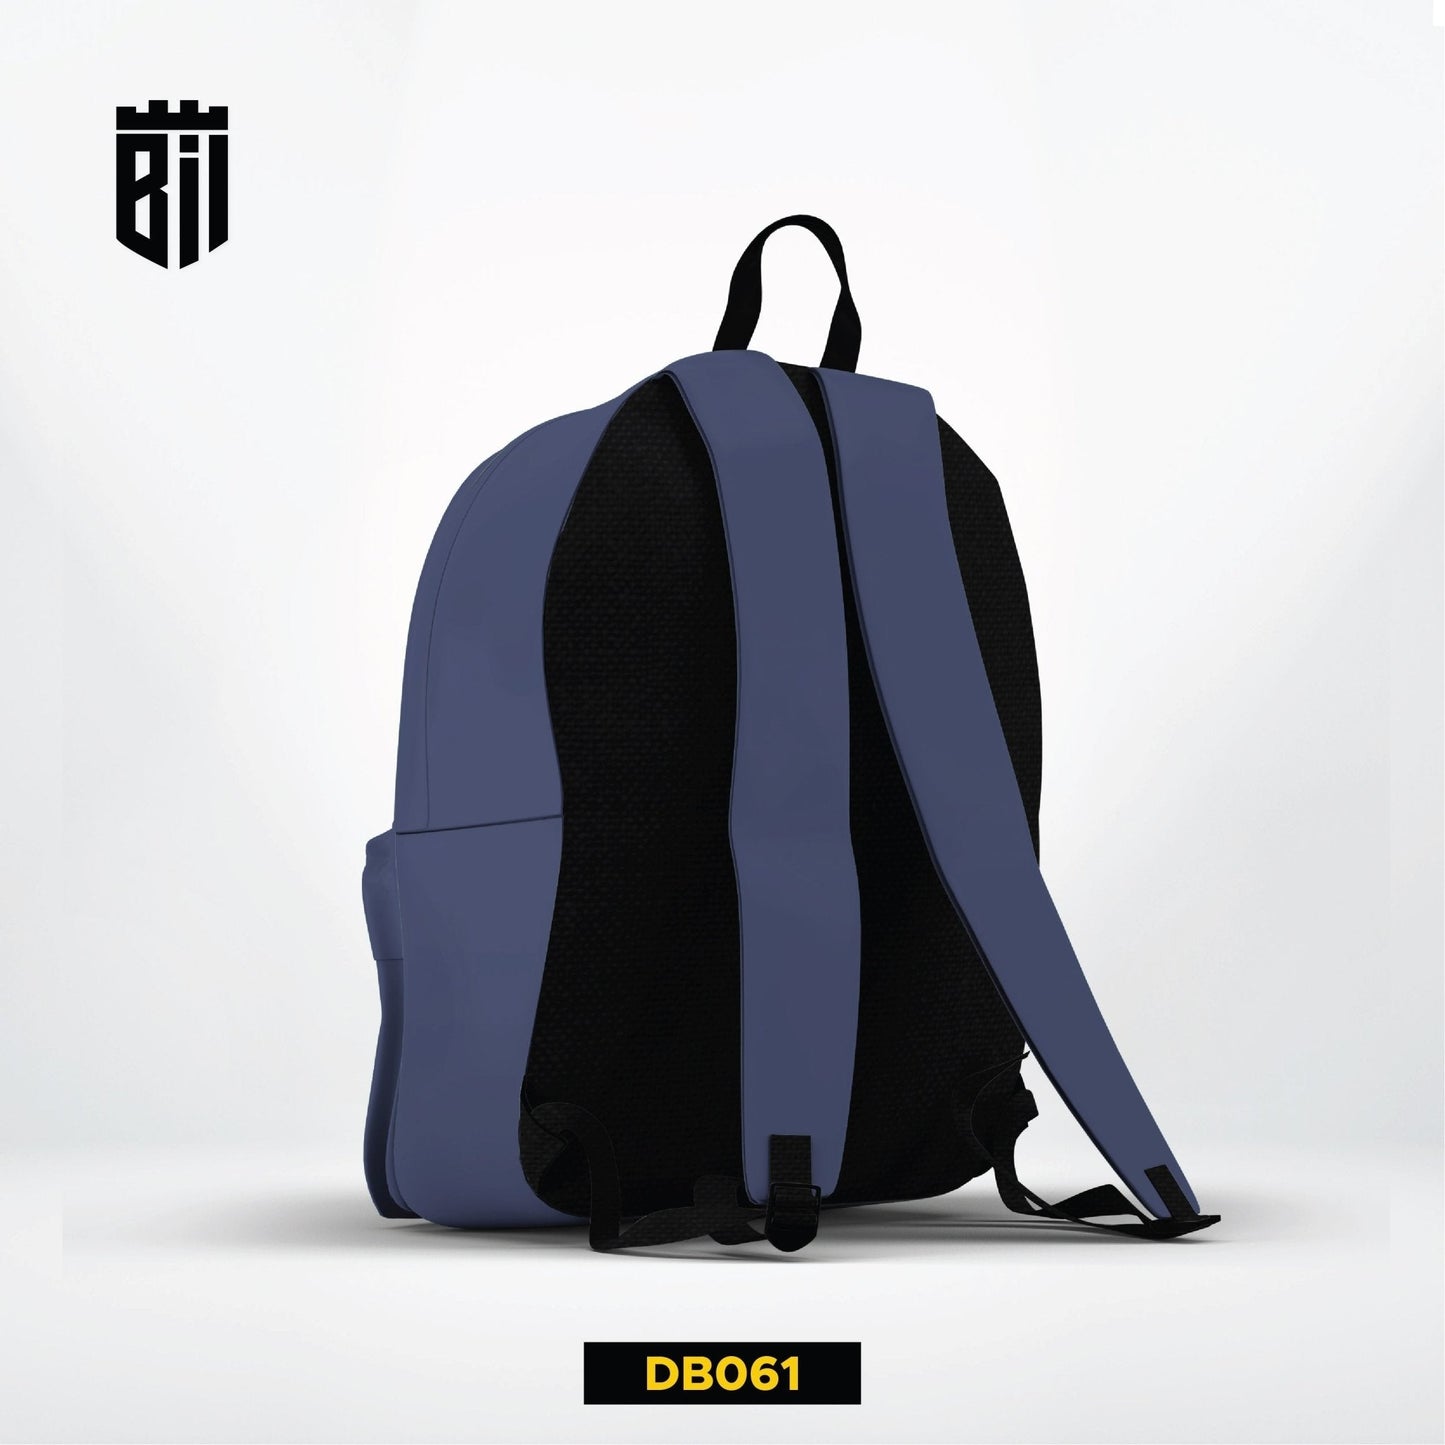 DB061 Navy Blue Allover Printed Backpack - BREACHIT